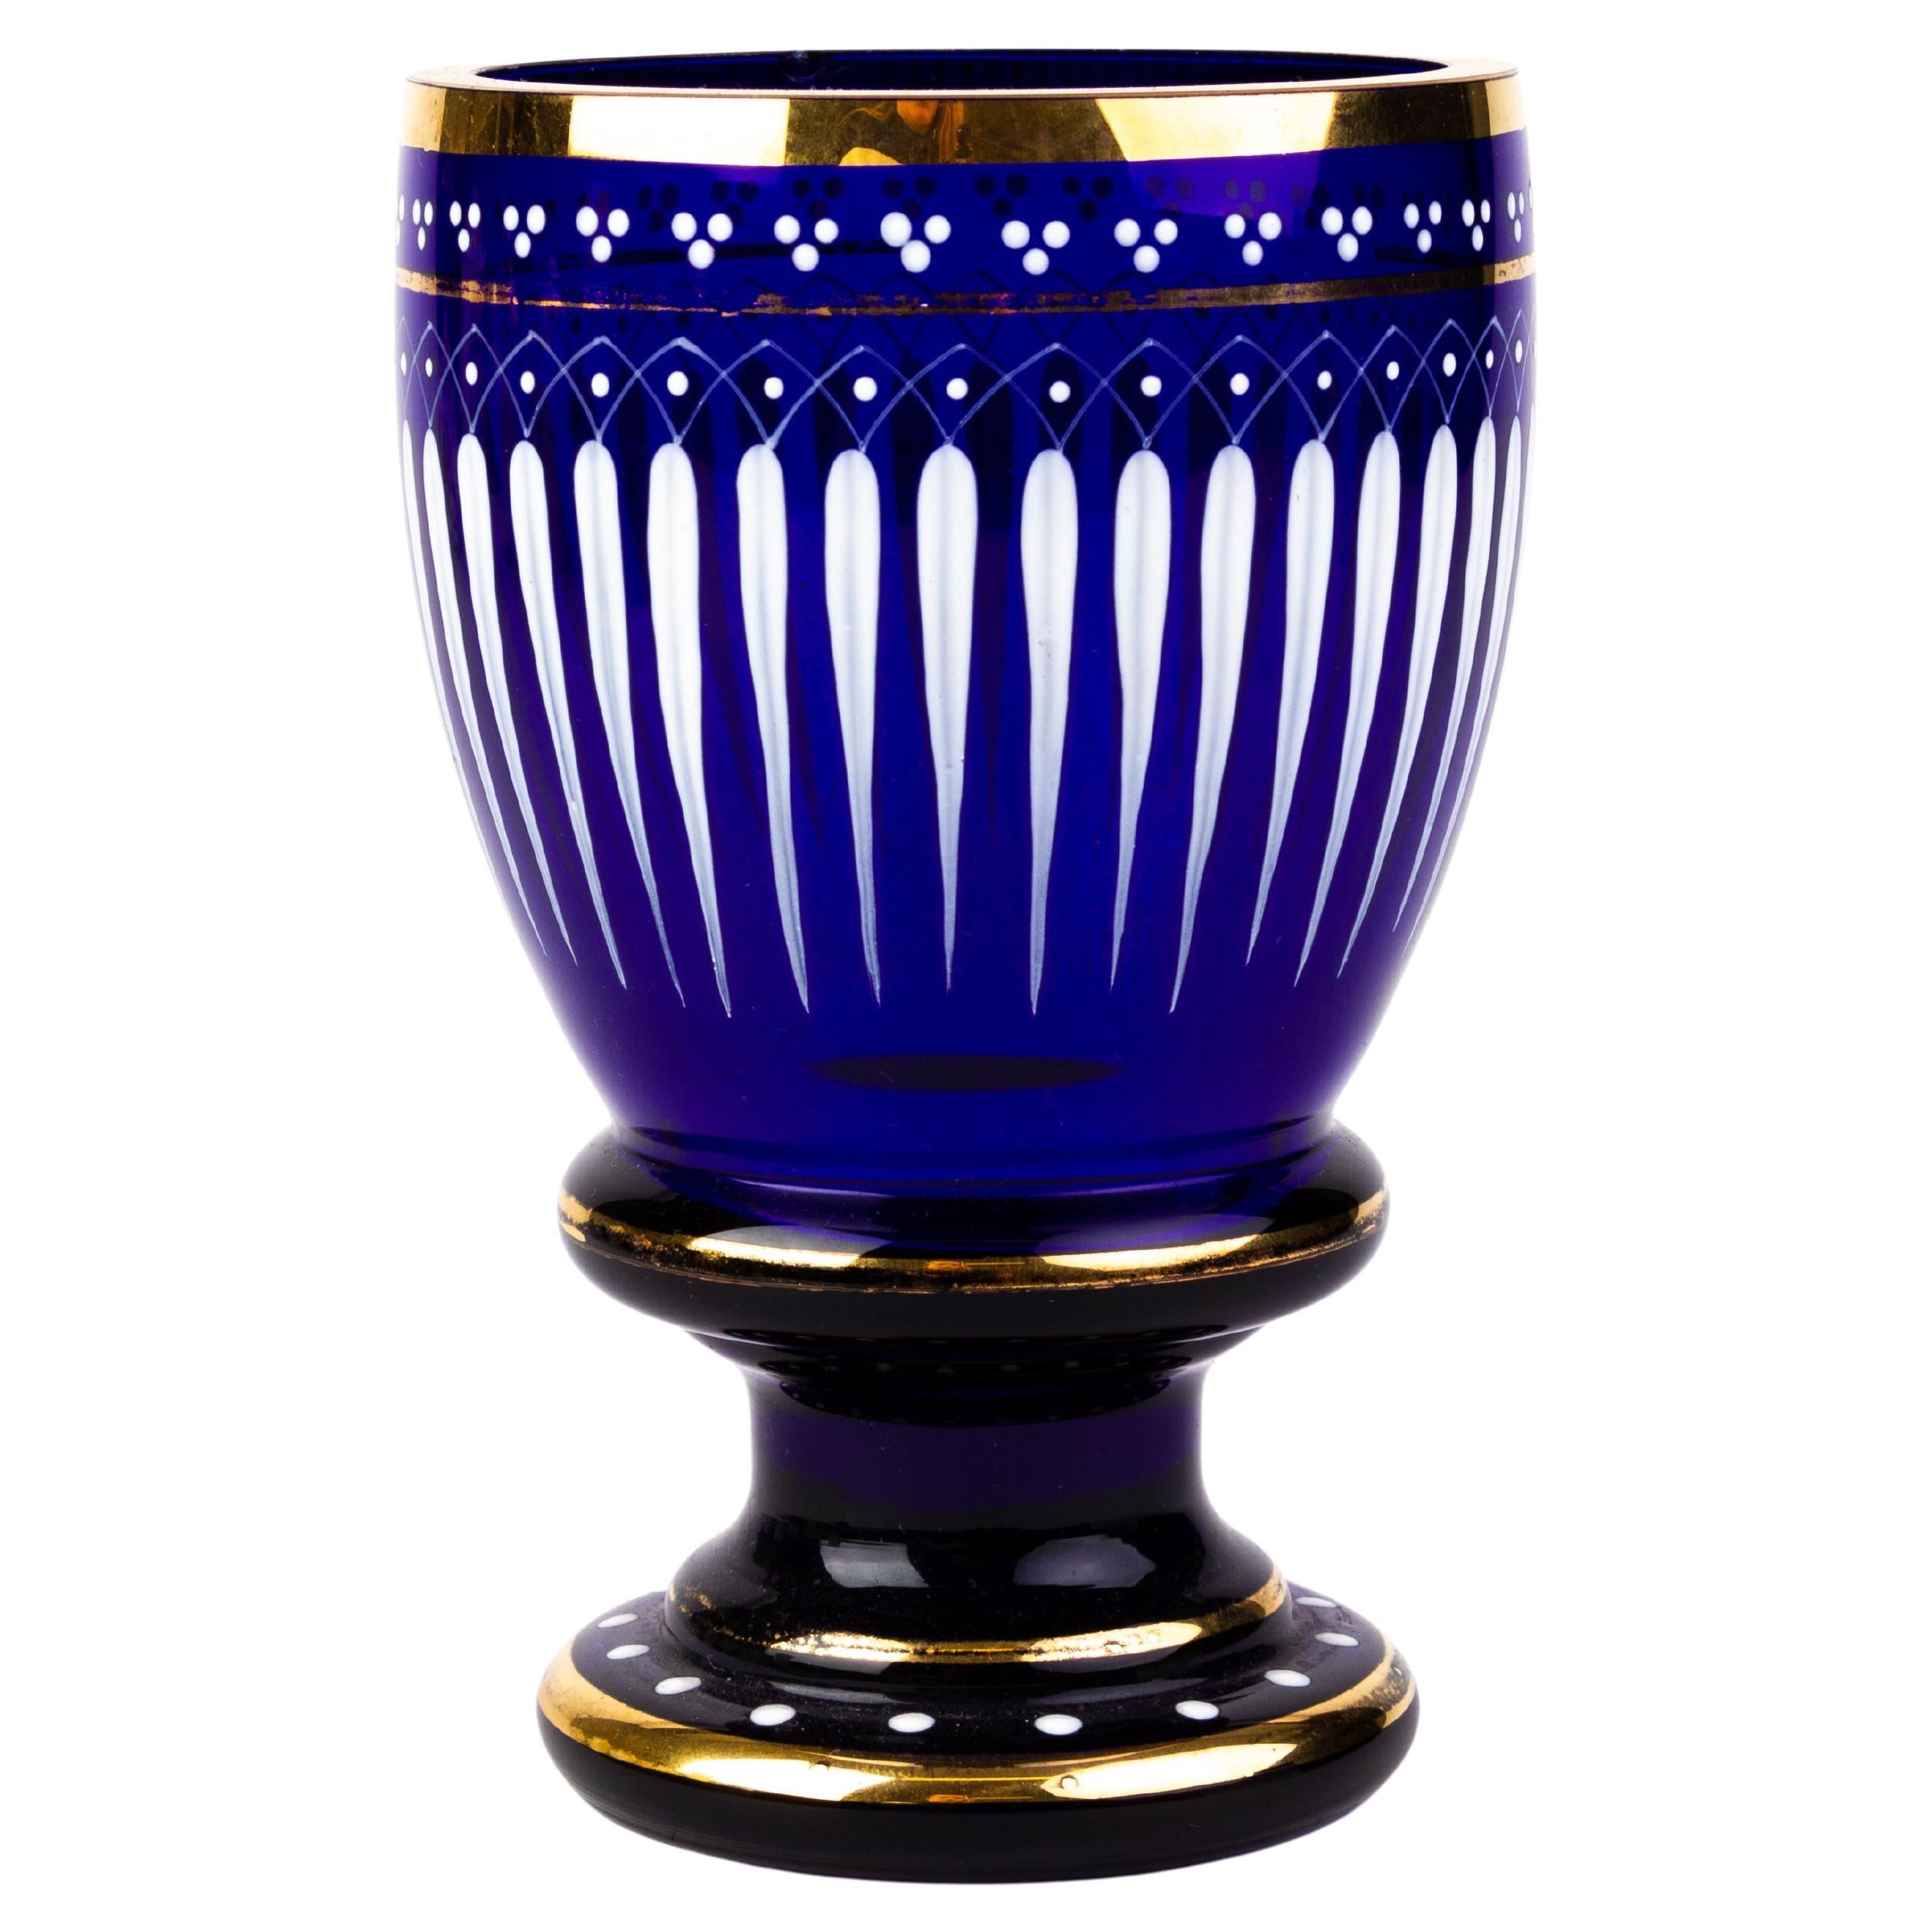 Enamel Painted Bristol Blue Glass Goblet with Gold Rims